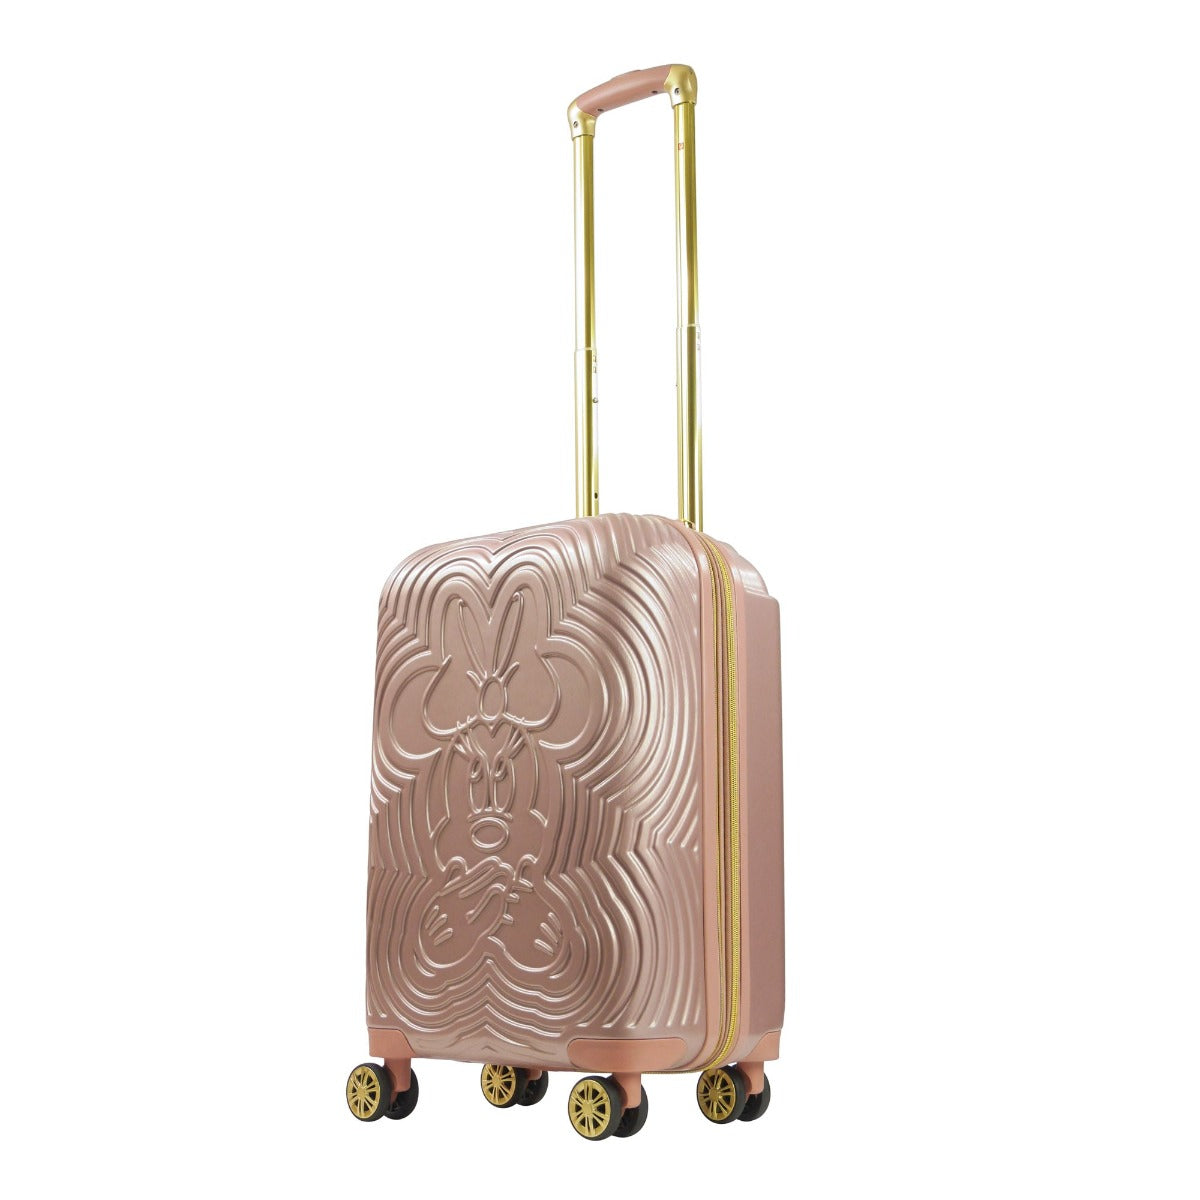 Disney Ful Playful Minnie Mouse 22" carry on expandable spinner suitcase hard sided luggage rose gold